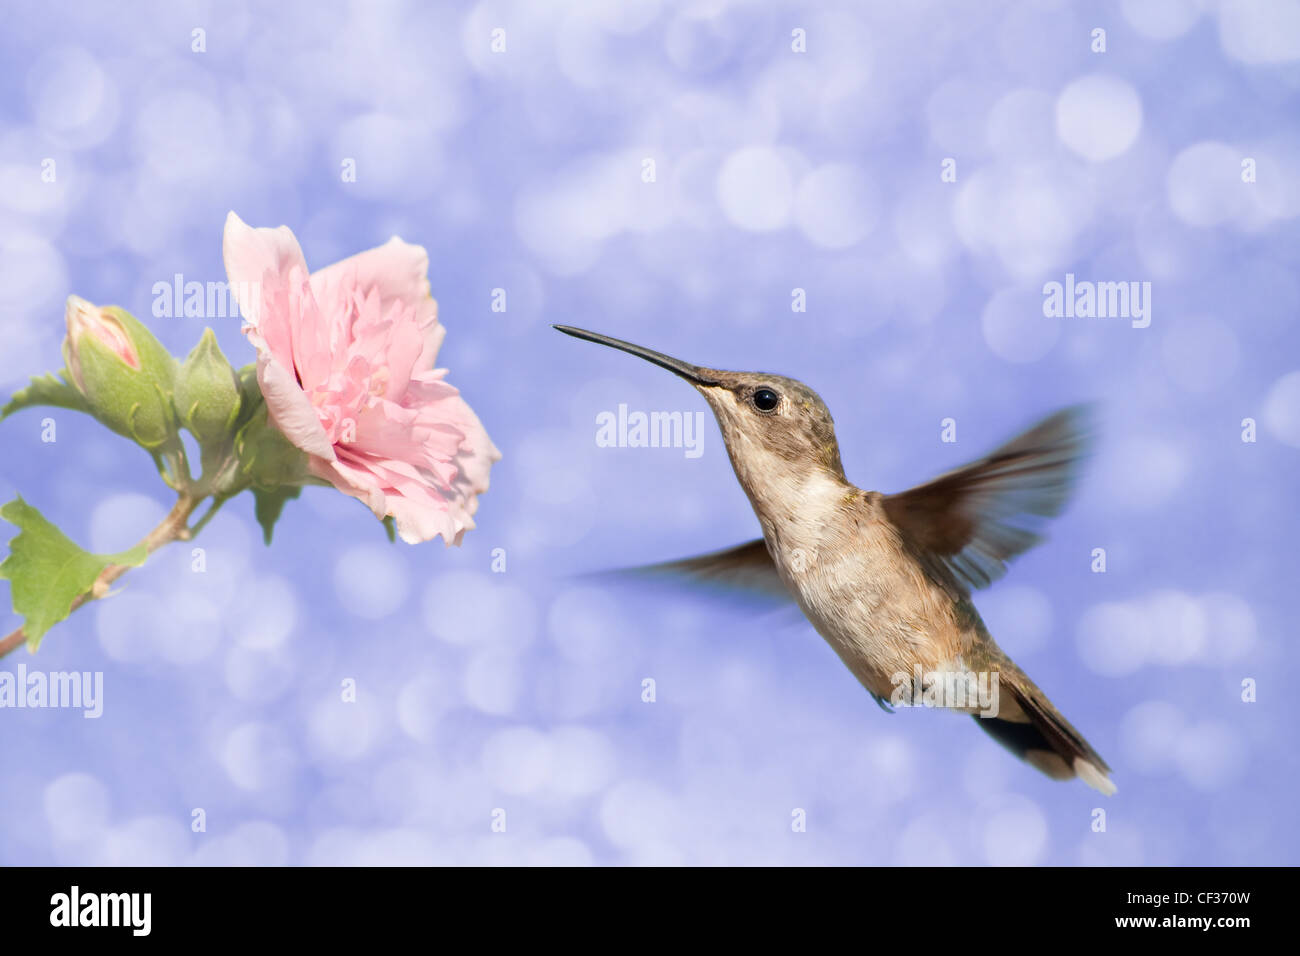 Dreamy image of a Hummingbird feeding on a pale pink Hibiscus flower against purple background Stock Photo